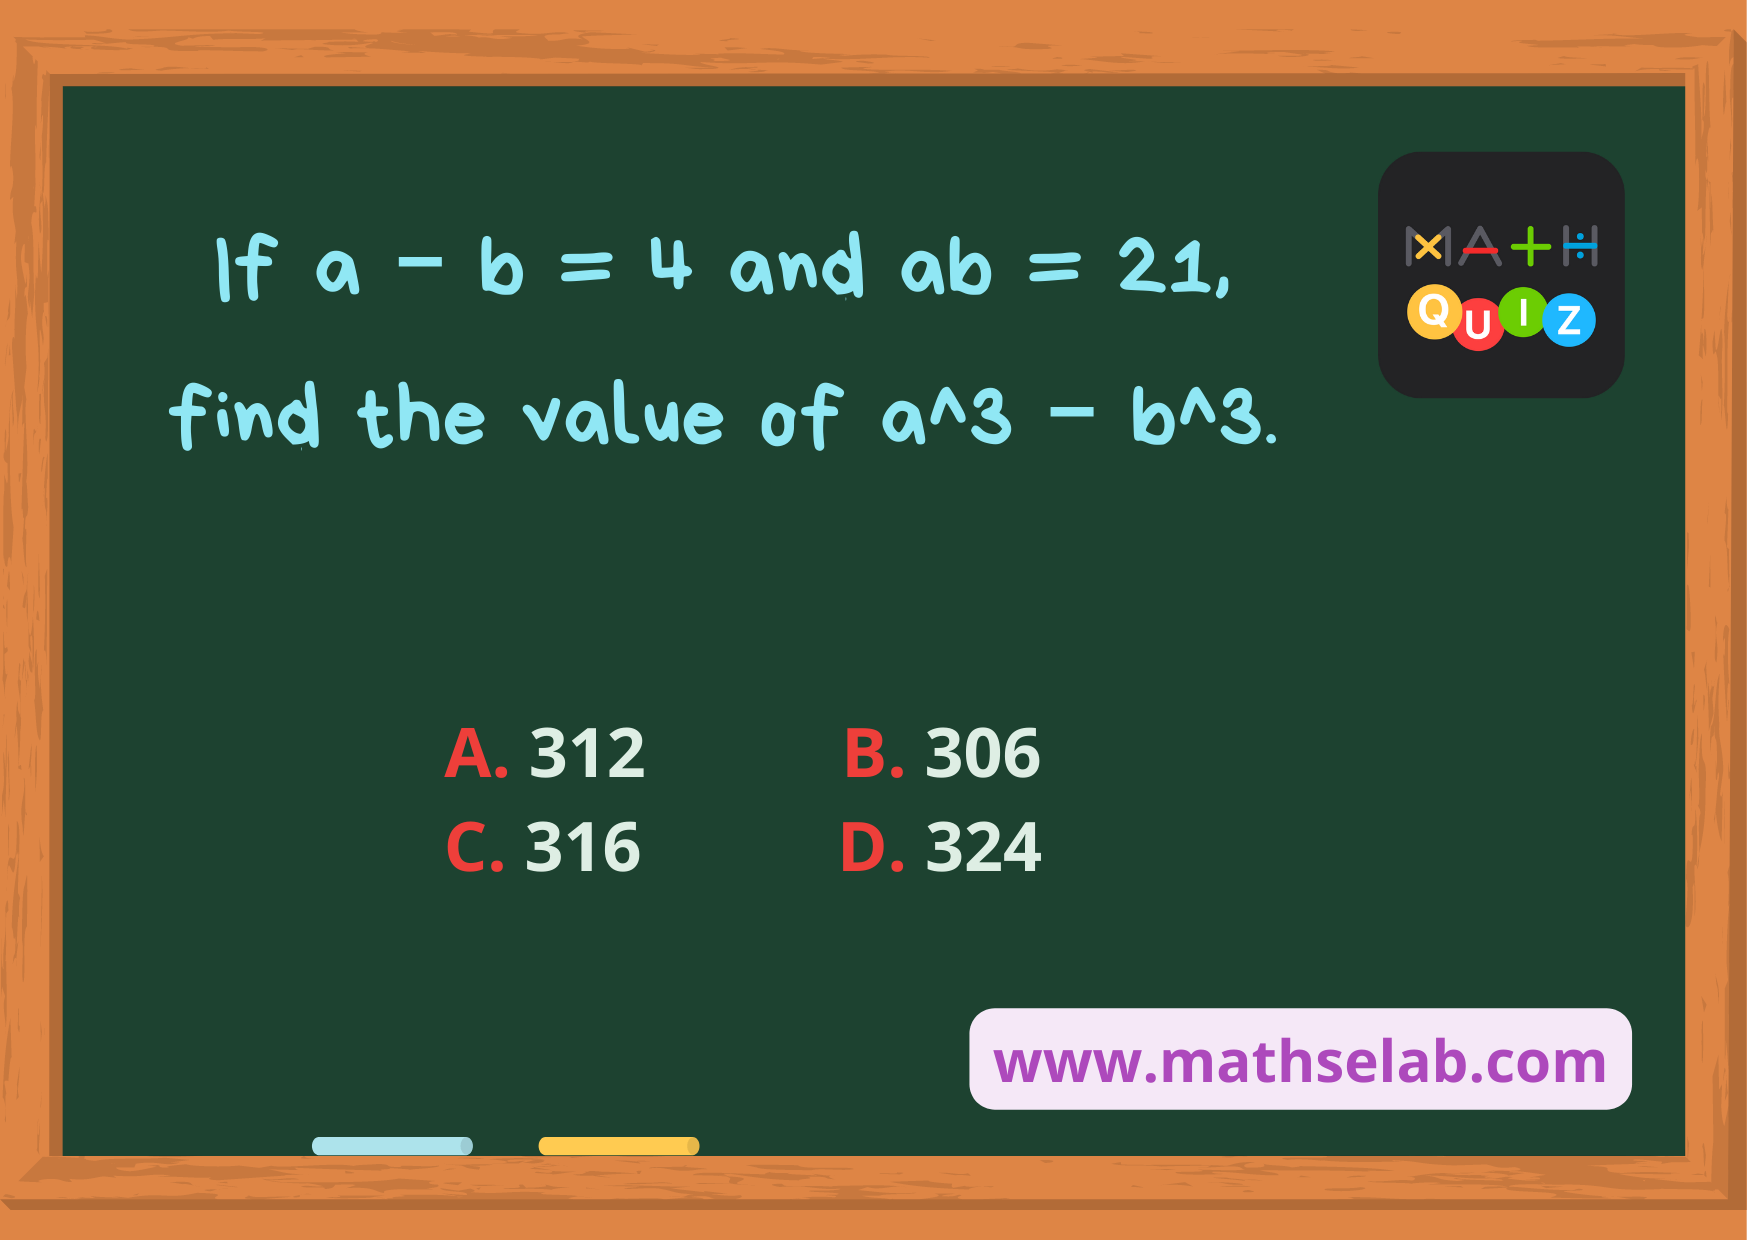 If a − b = 4 and ab = 21, find the value of a^3 − b^3. - www.mathselab.com